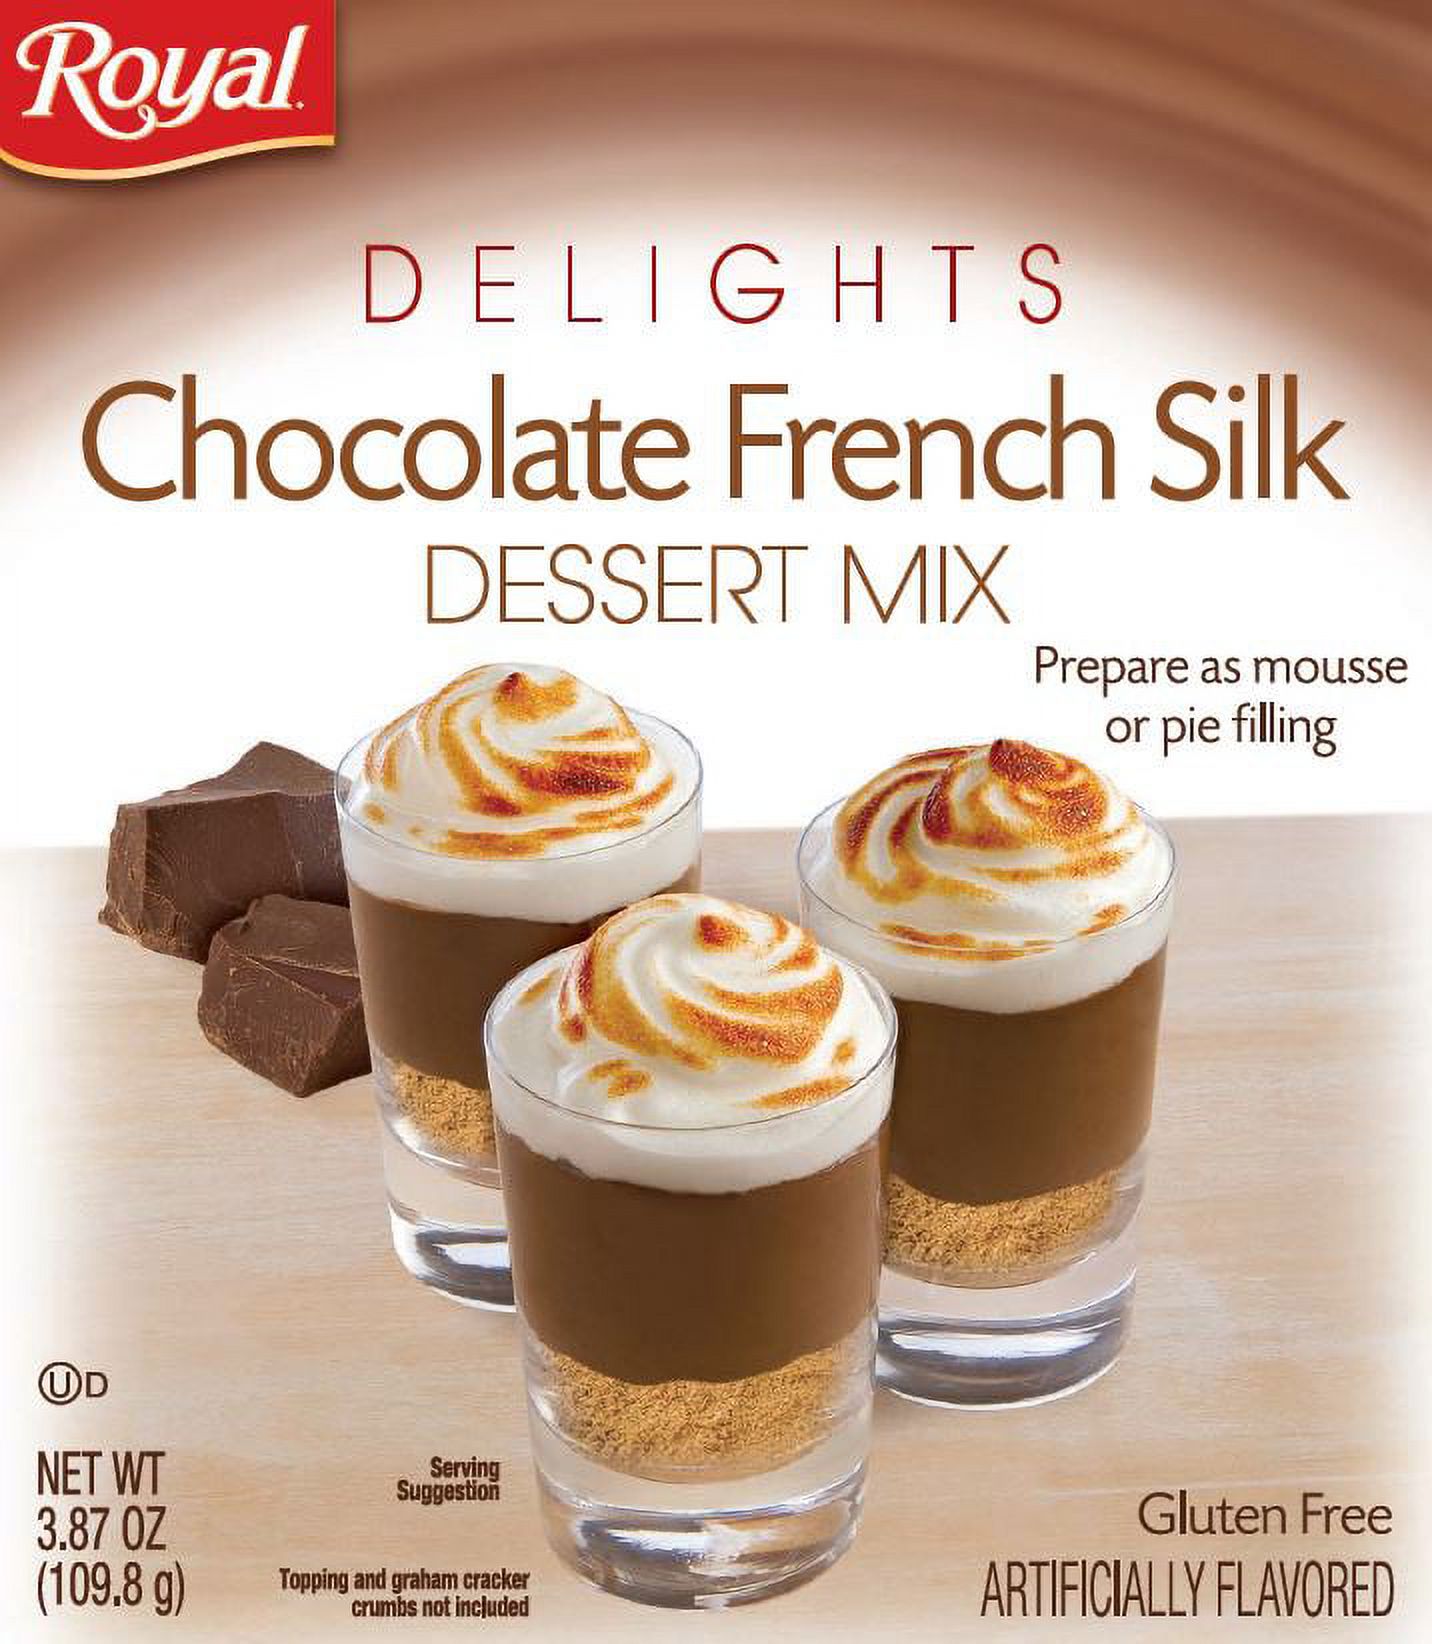 Royal Delights Chocolate French Silk Dessert Mix - image 1 of 6